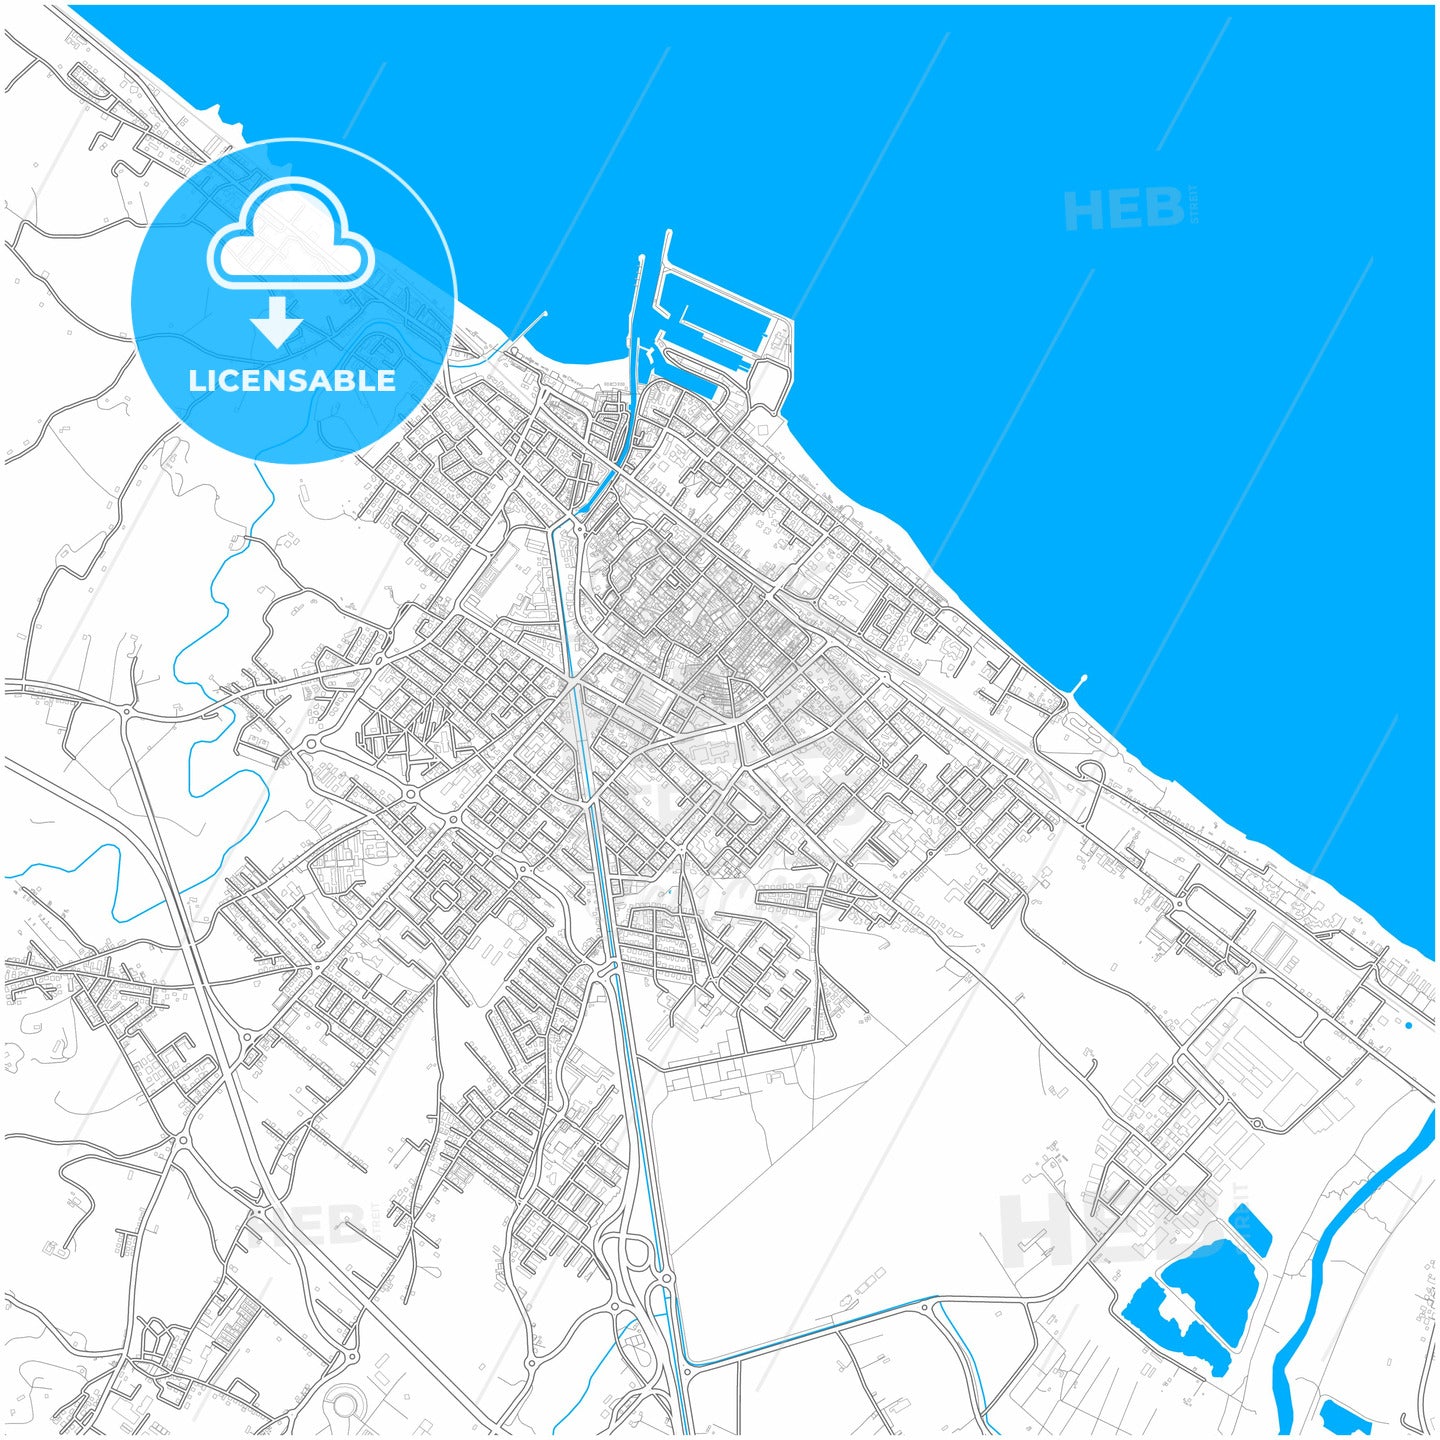 Fano, Marche, Italy, city map with high quality roads.